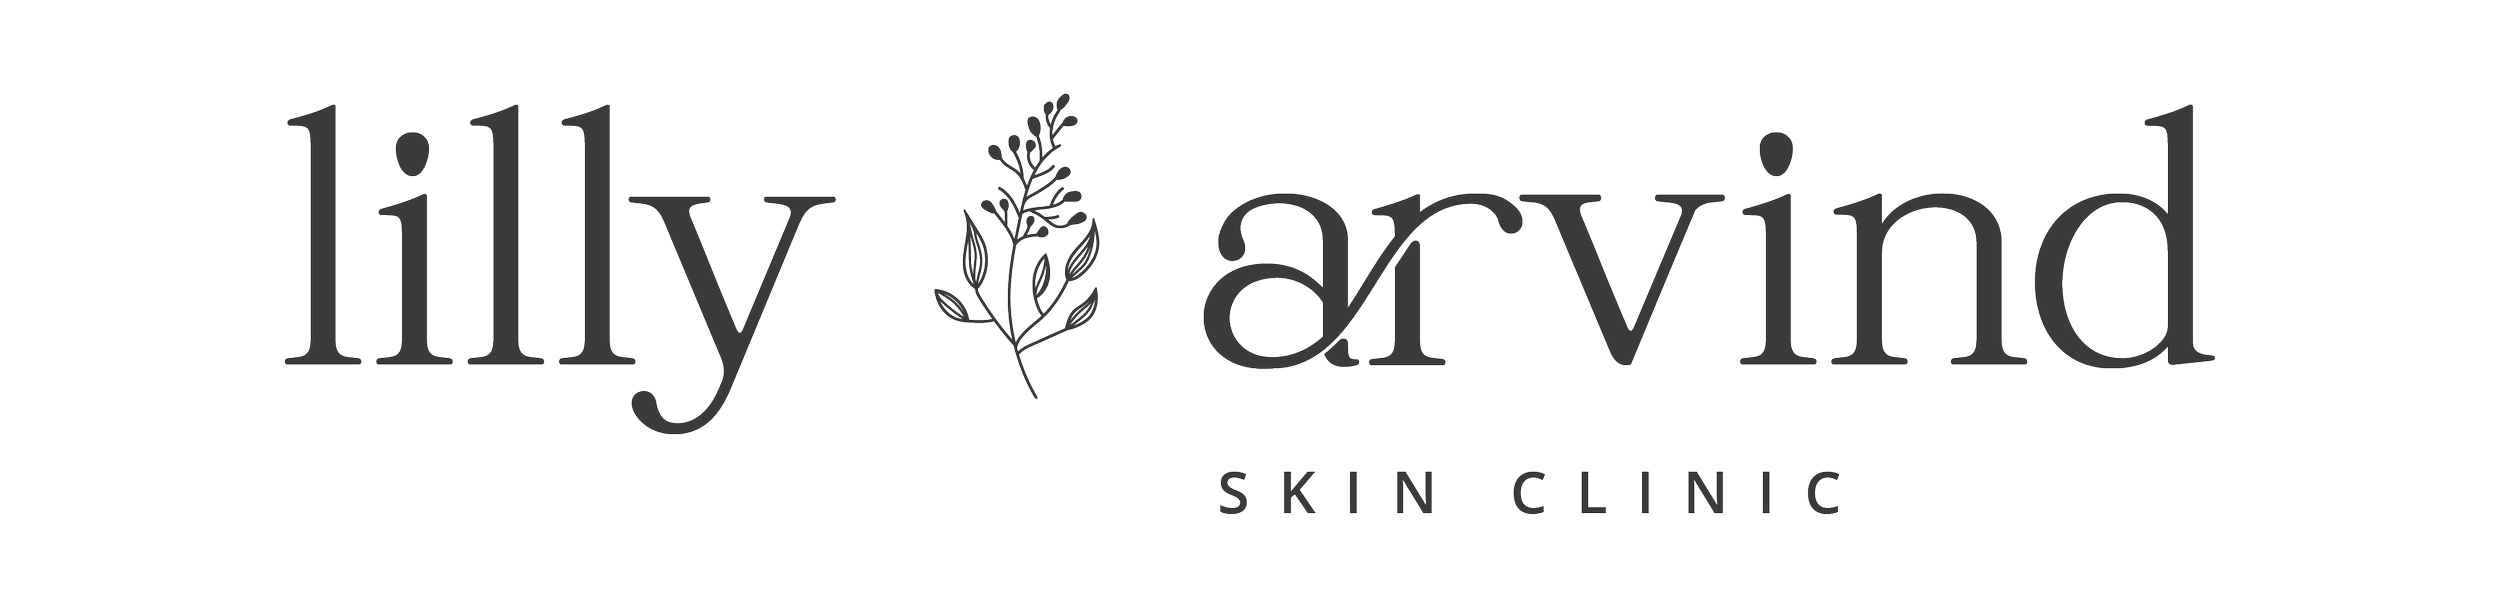 Lilly Arvind Skin Clinic